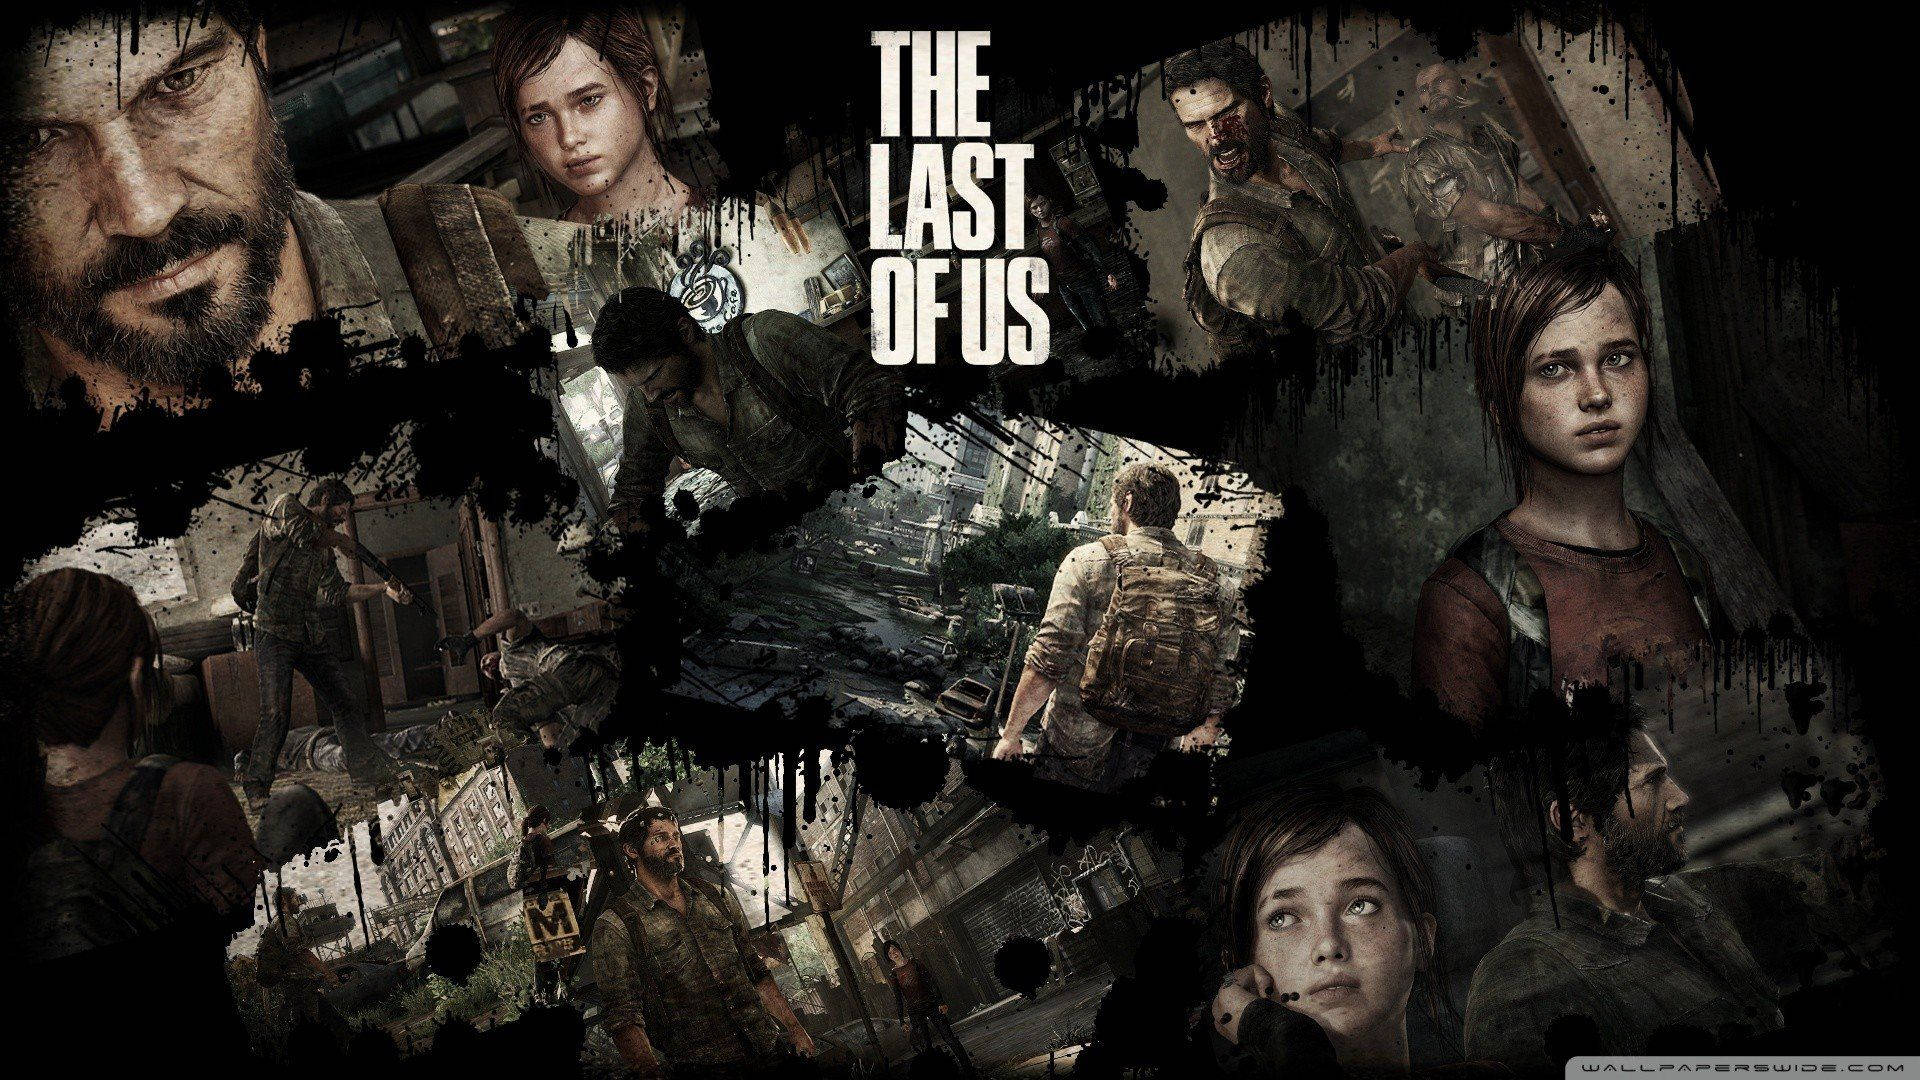 Joel and Ellie living on the edge in The Last of Us Wallpaper